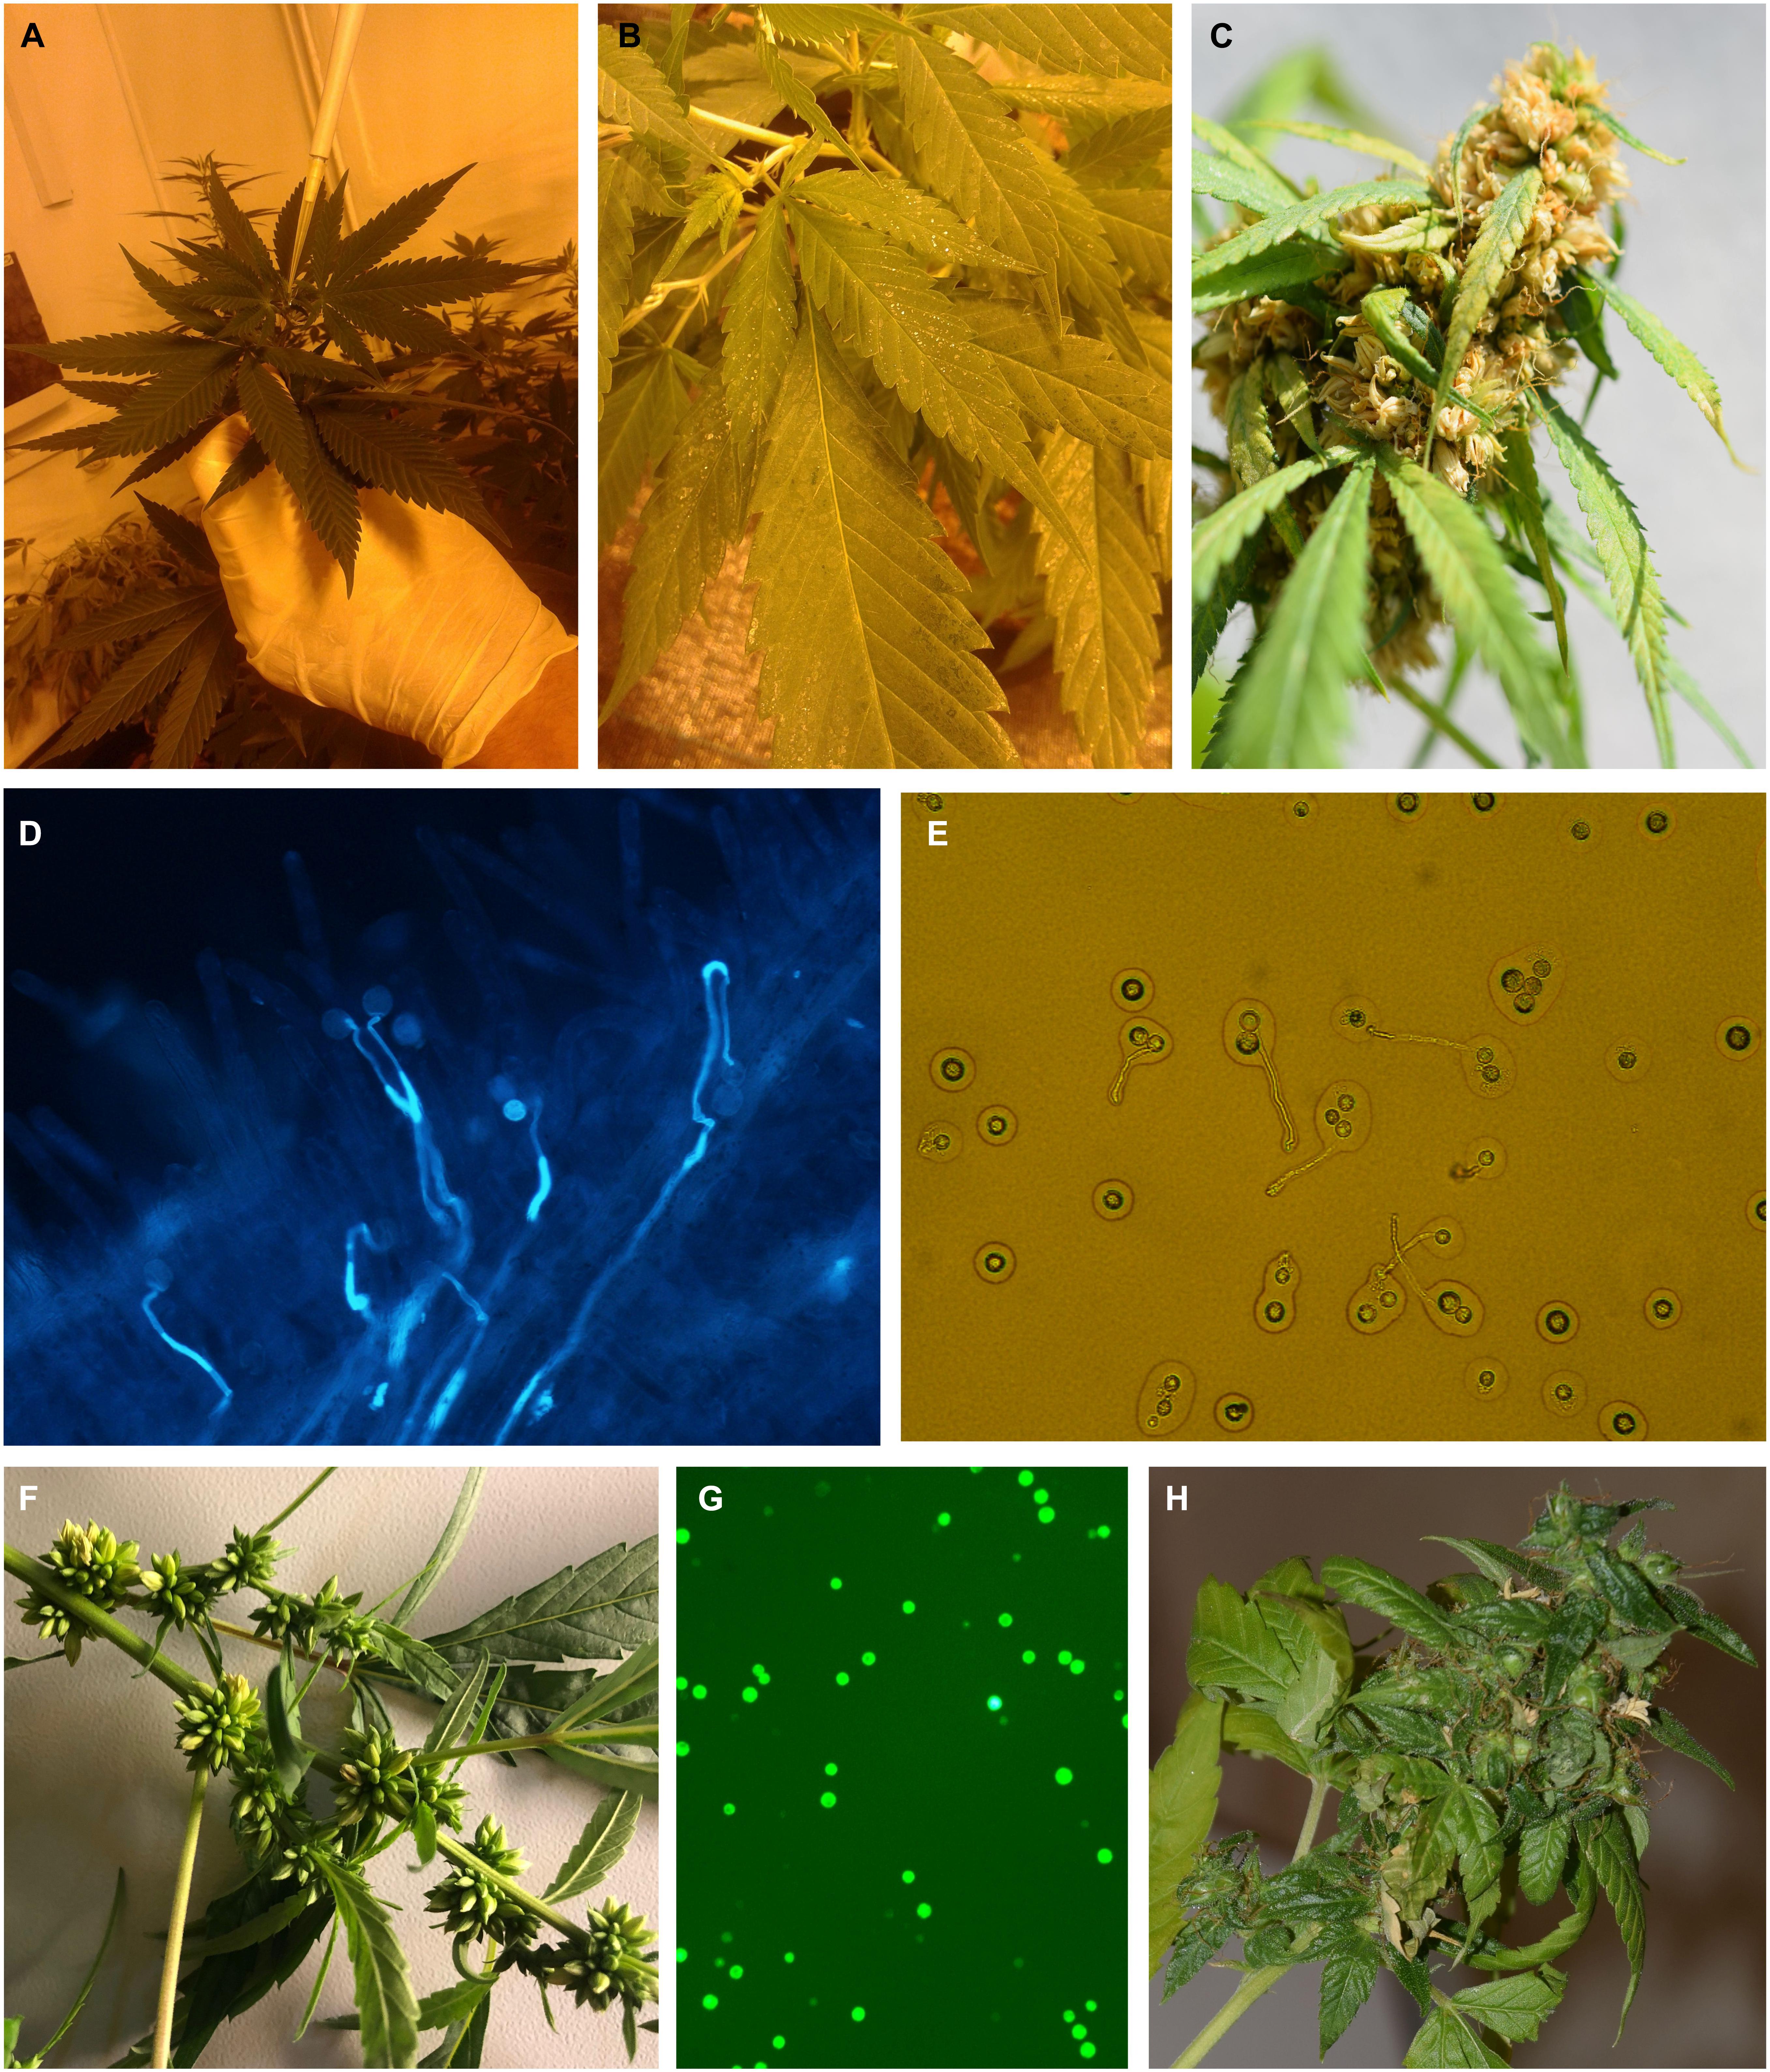 The Best Microscopic Images Of Marijuana From The Past 50 Years